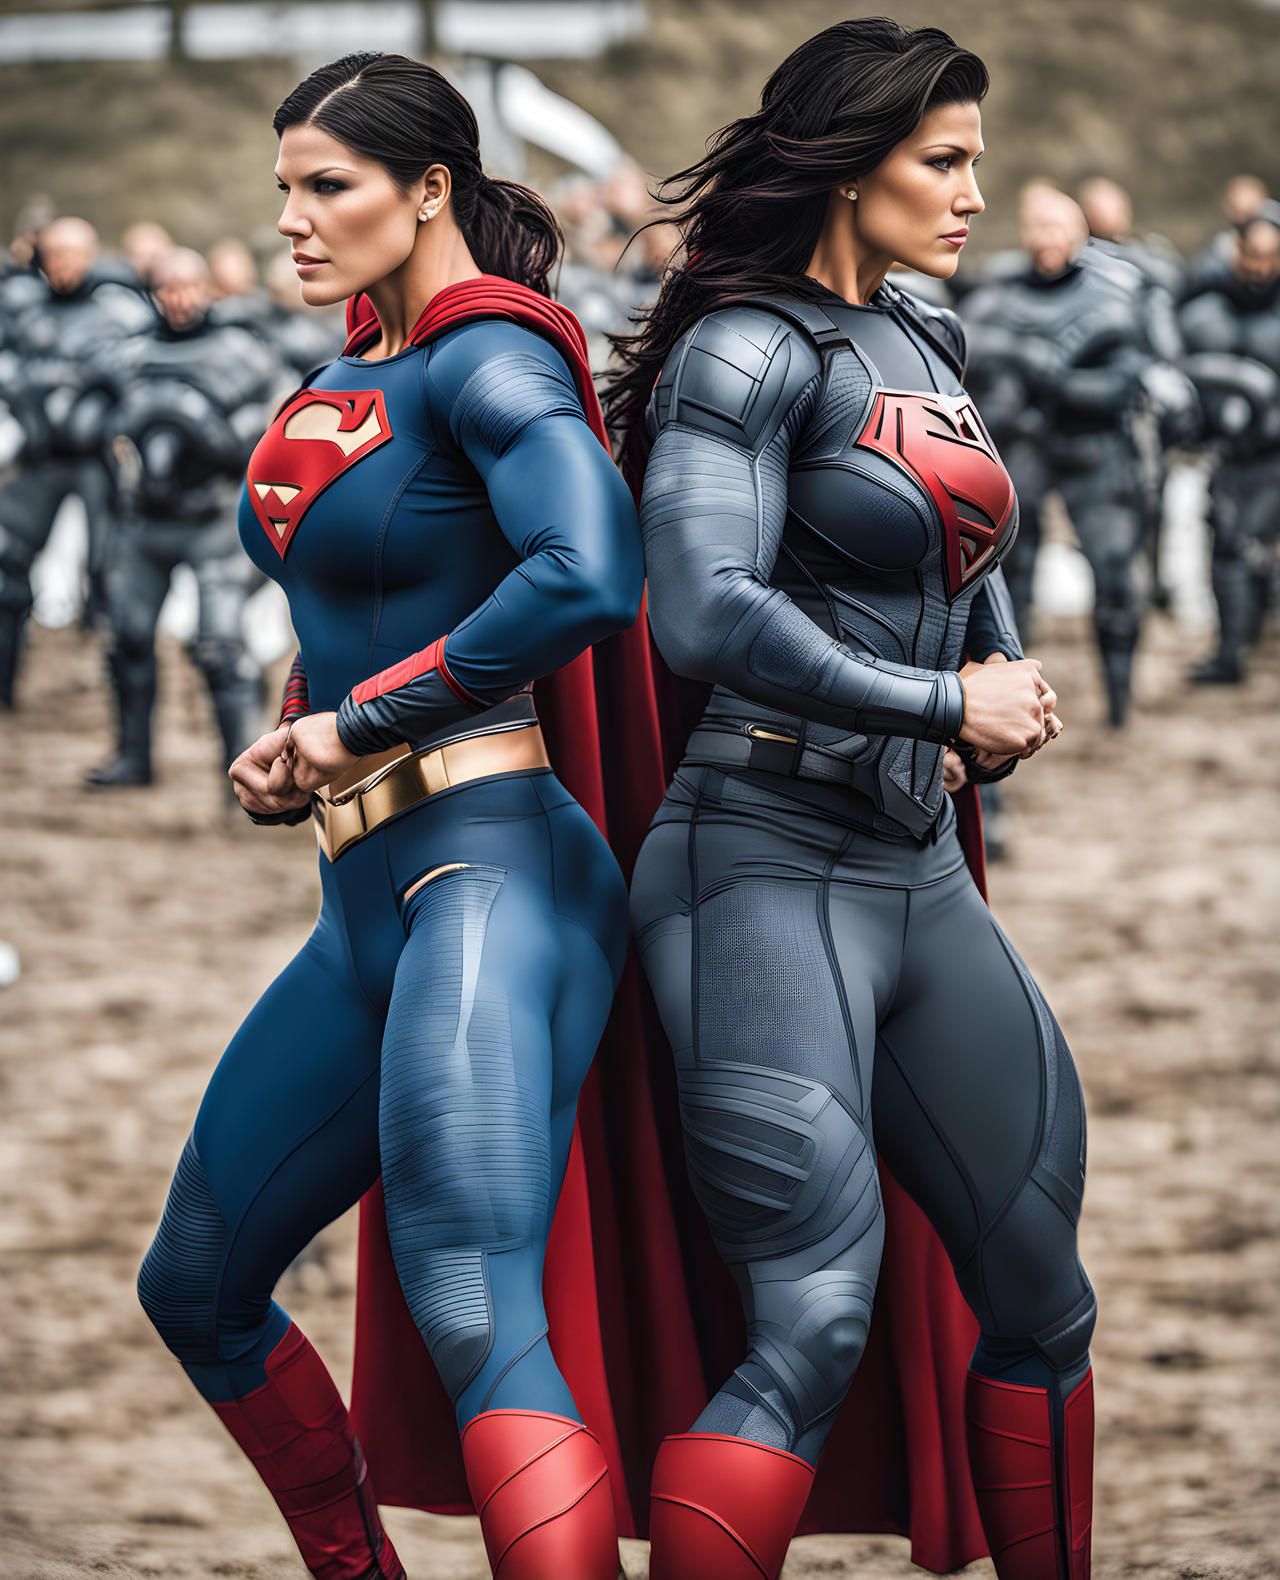 In Battle - Superwomen from Earth 08 and Earth 13 by Priyasneha on